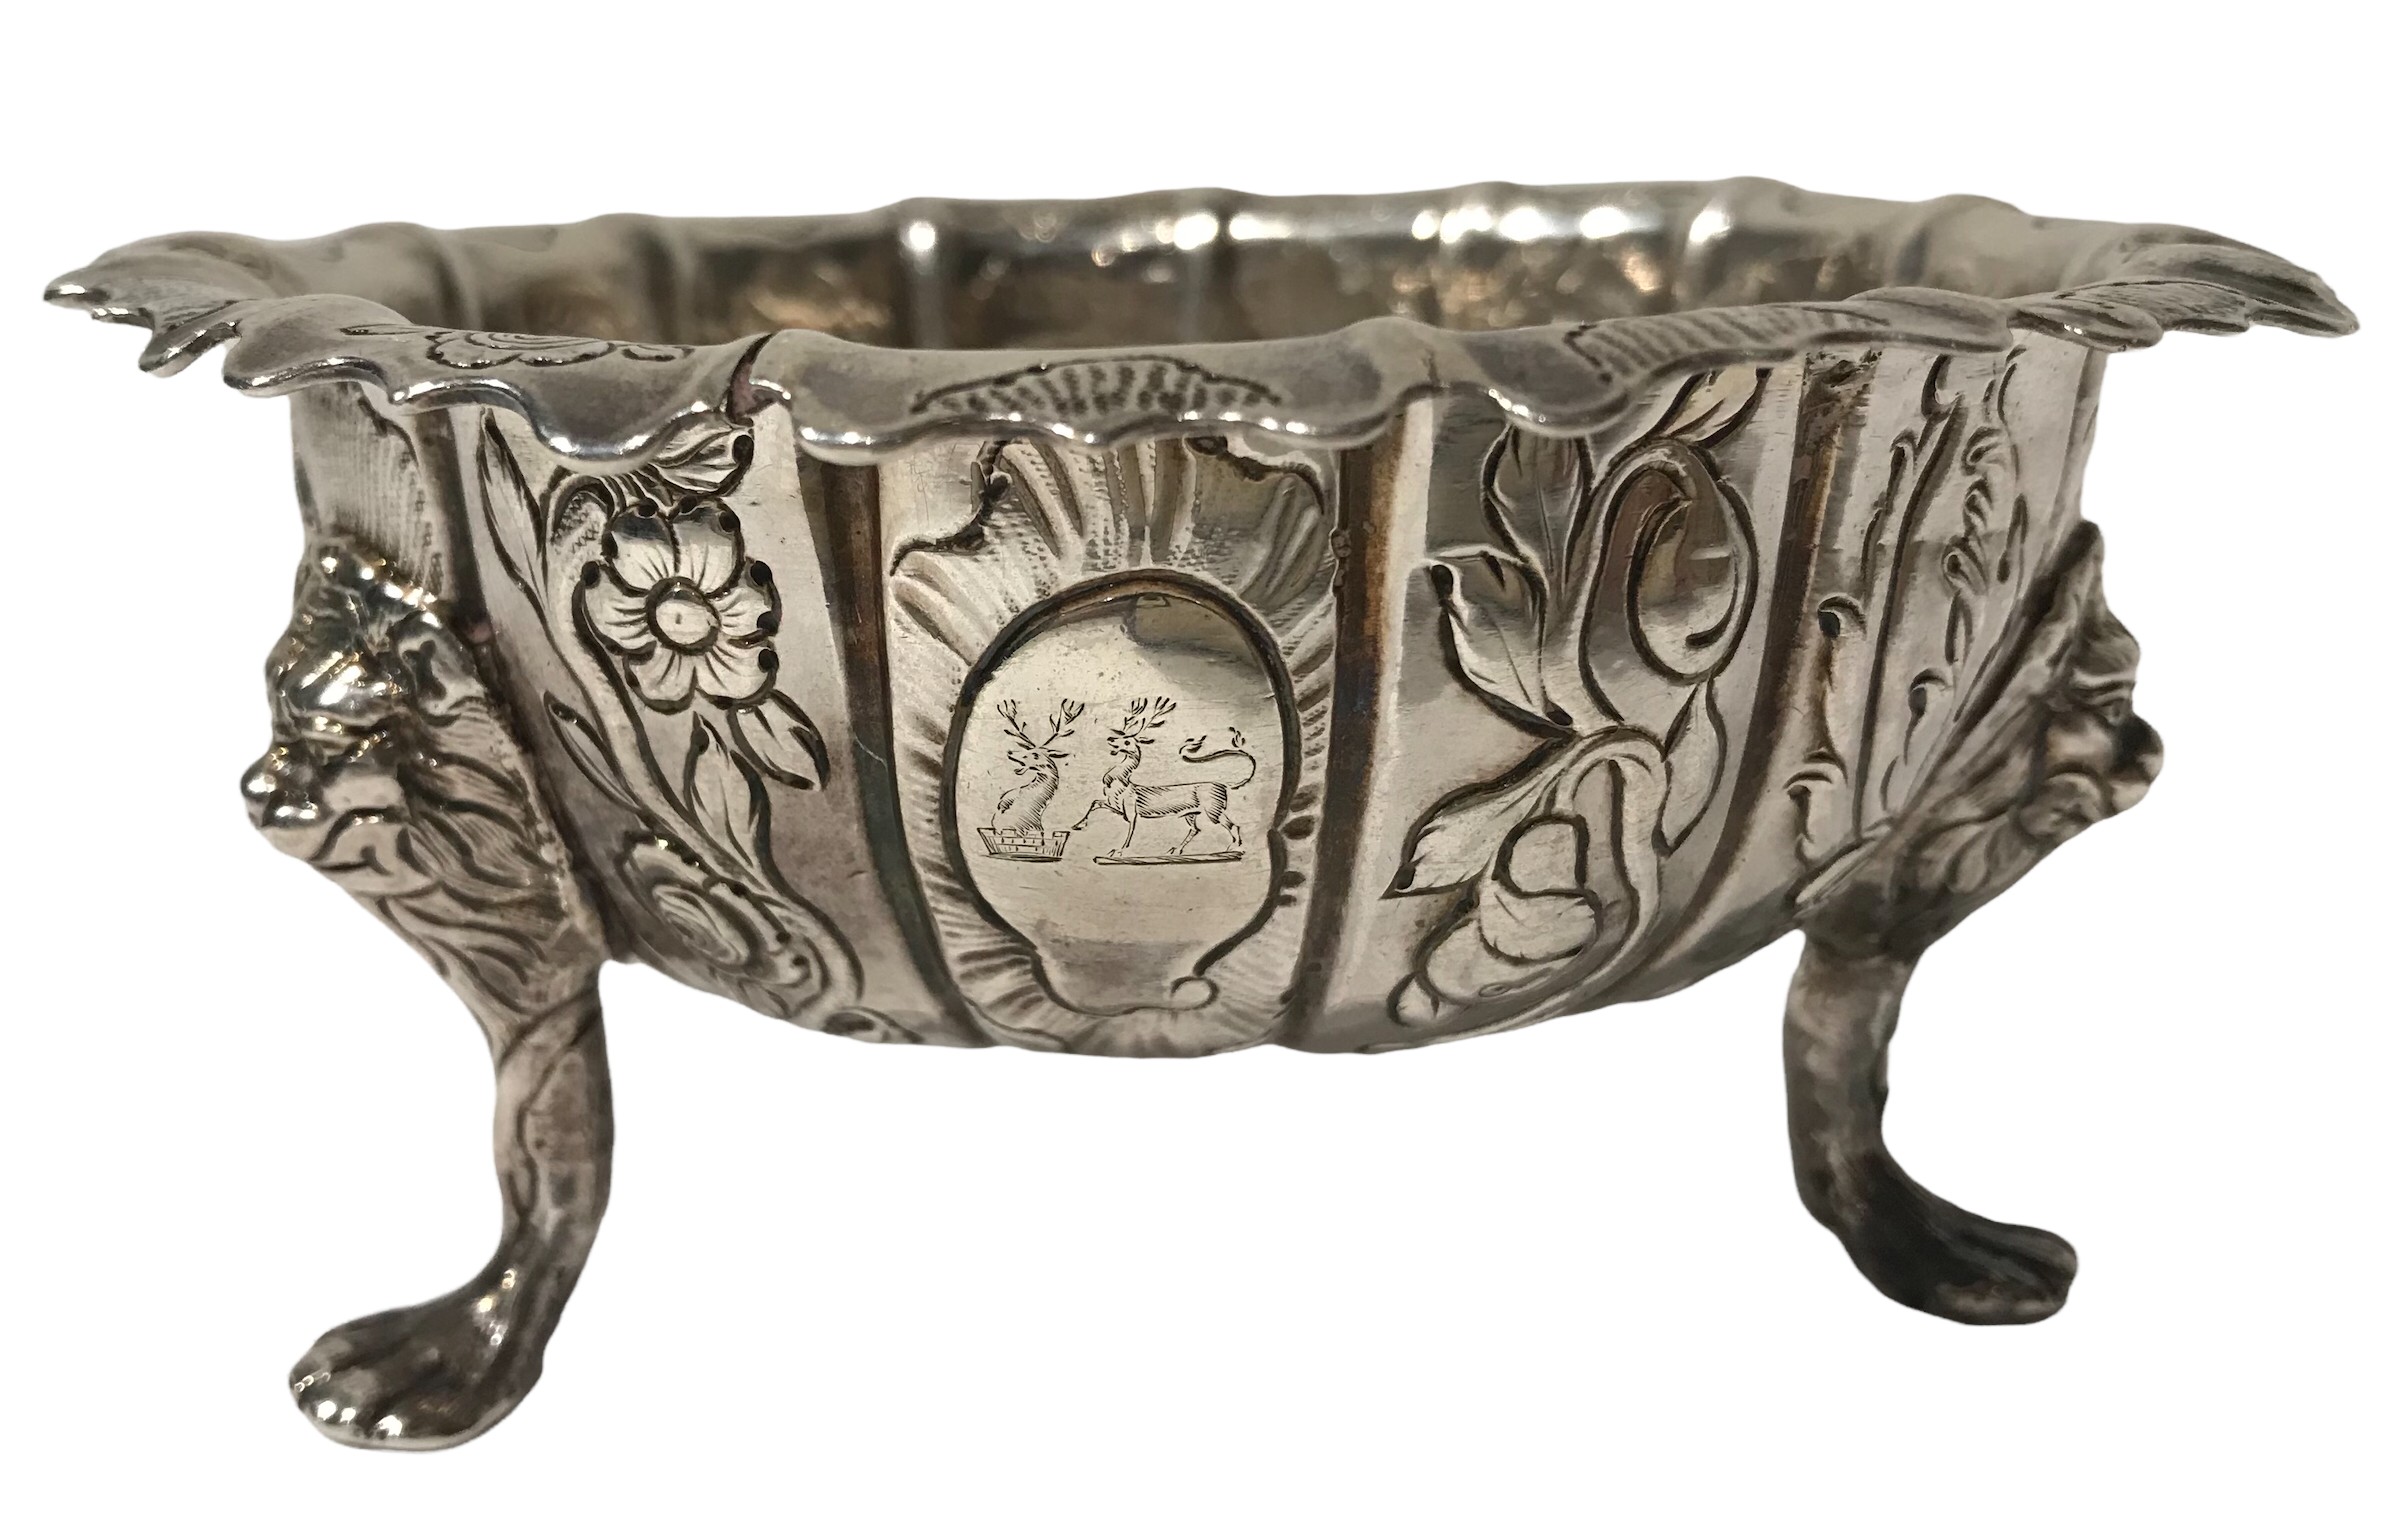 WILLIAM THOMPSON, GEORGE III IRISH SILVER SUGAR BOWL Having decorative incised and repoussé work - Image 3 of 6